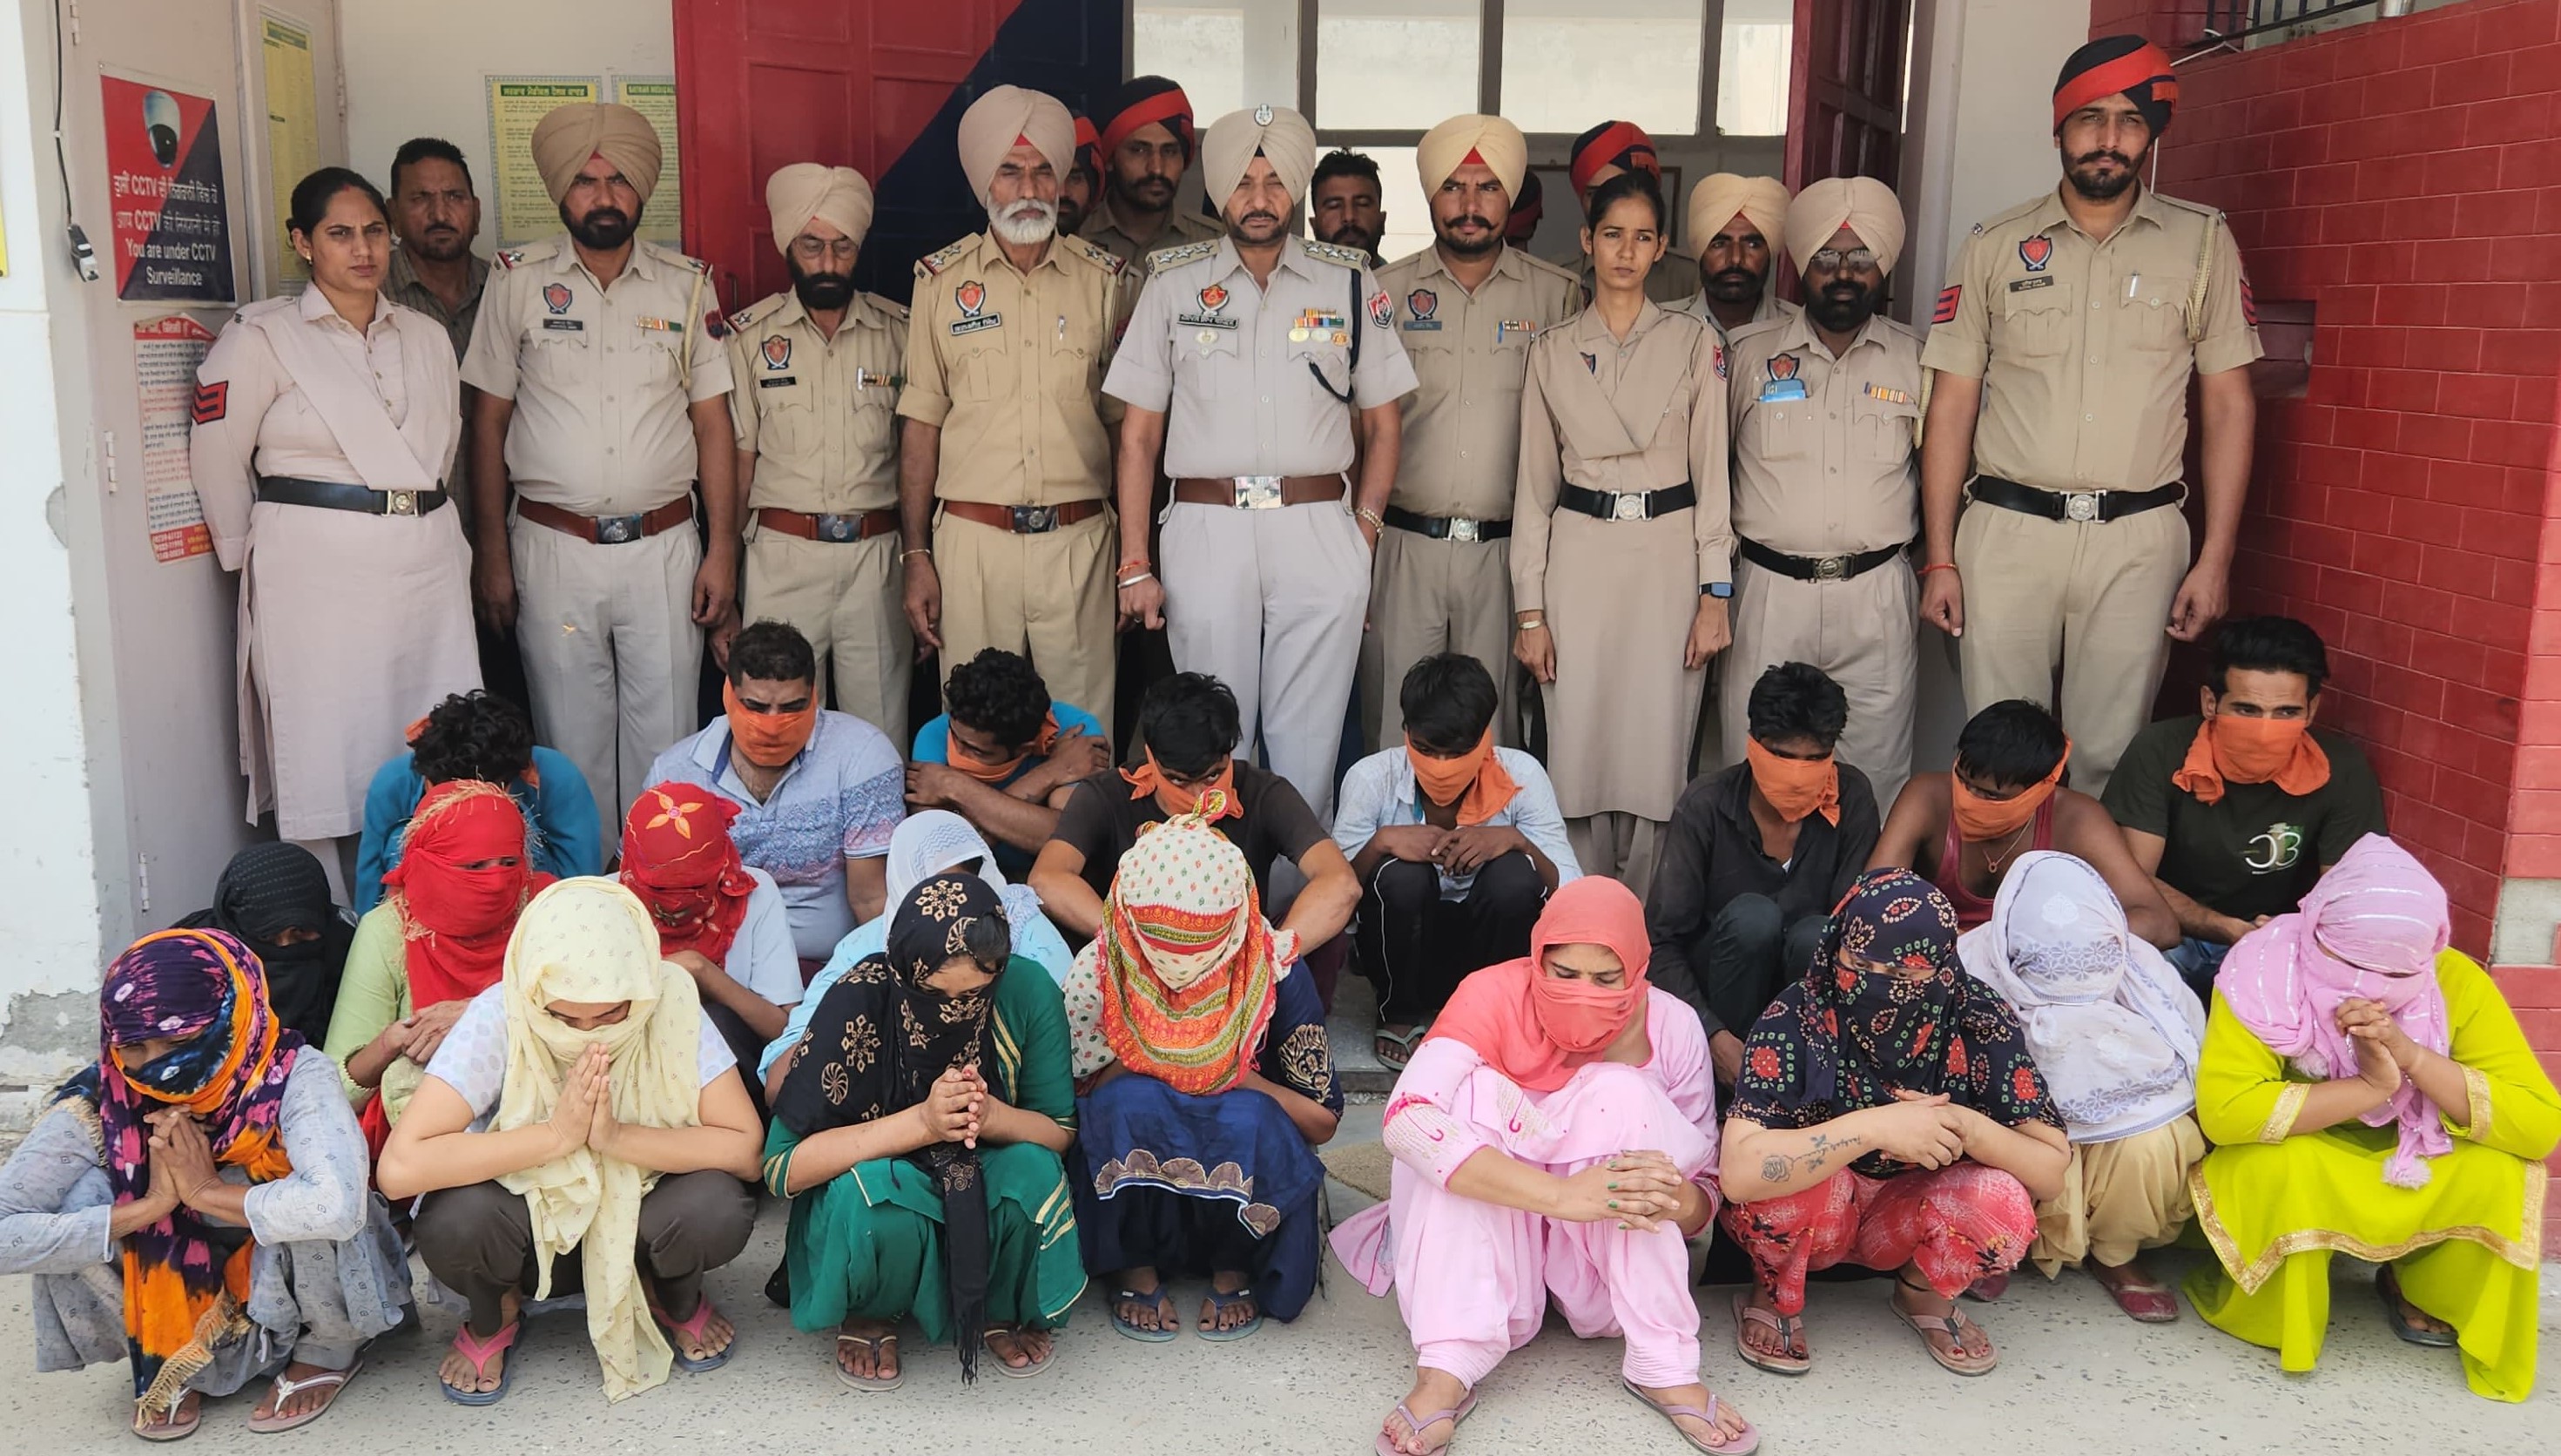 08 persons and 12 women engaged in prostitution business arrested